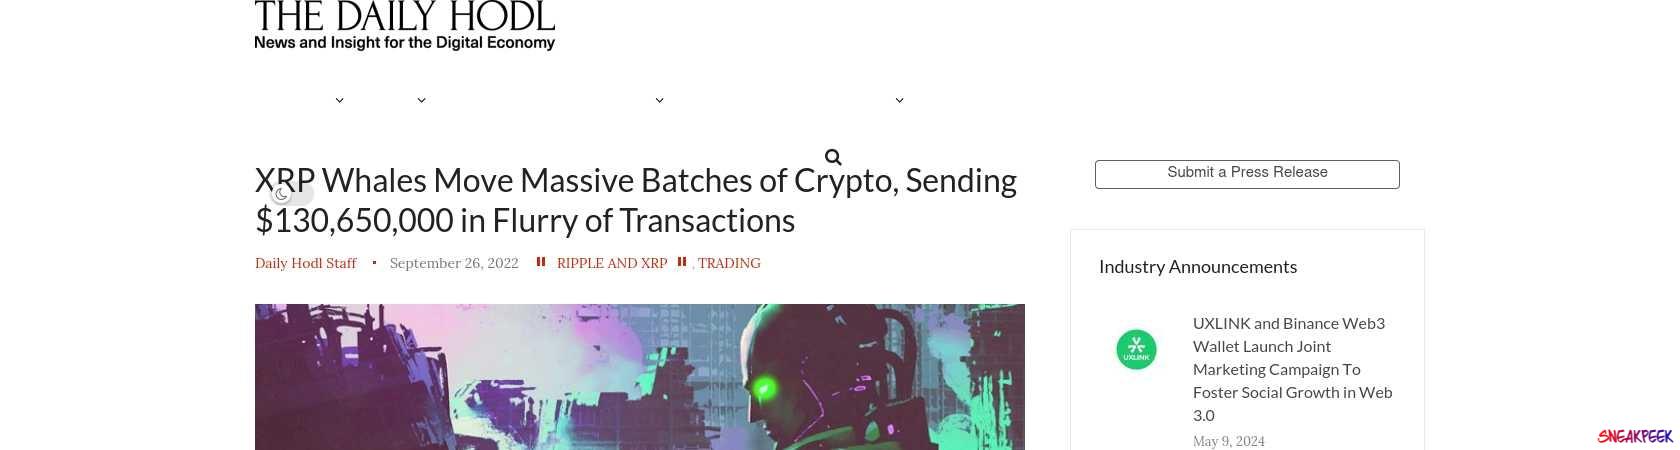 Read the full Article:  ⭲ XRP Whales Move Massive Batches of Crypto, Sending $130,650,000 in Flurry of Transactions